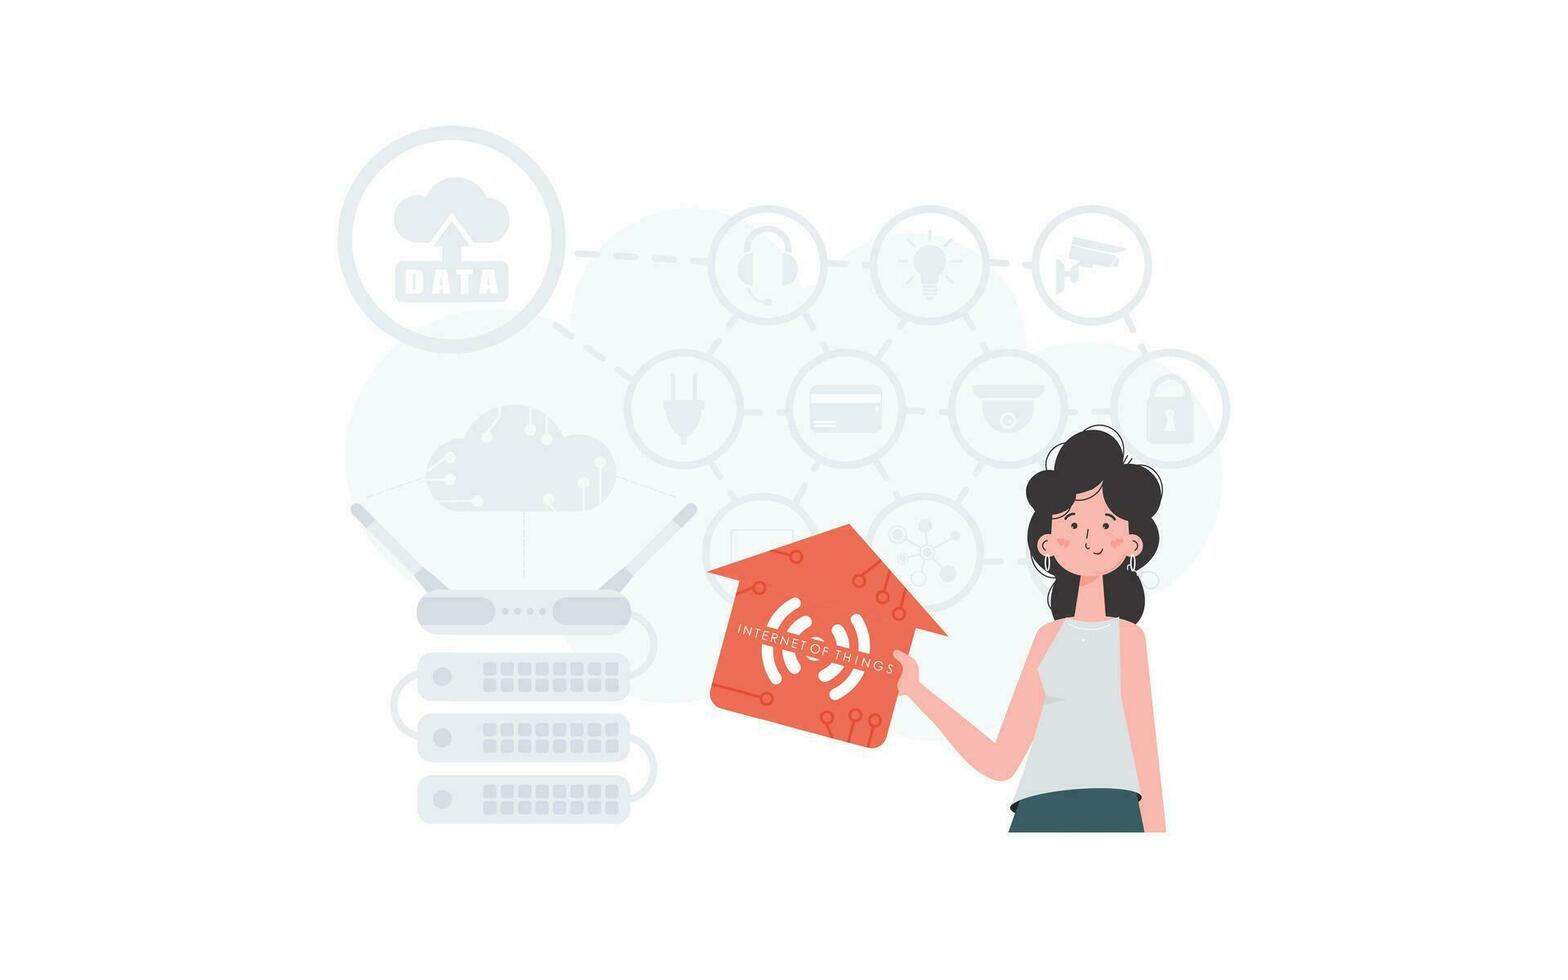 The woman is depicted waist-deep, holding an icon of a house in her hands. Internet of things concept. Good for presentations and websites. Vector illustration in trendy flat style.